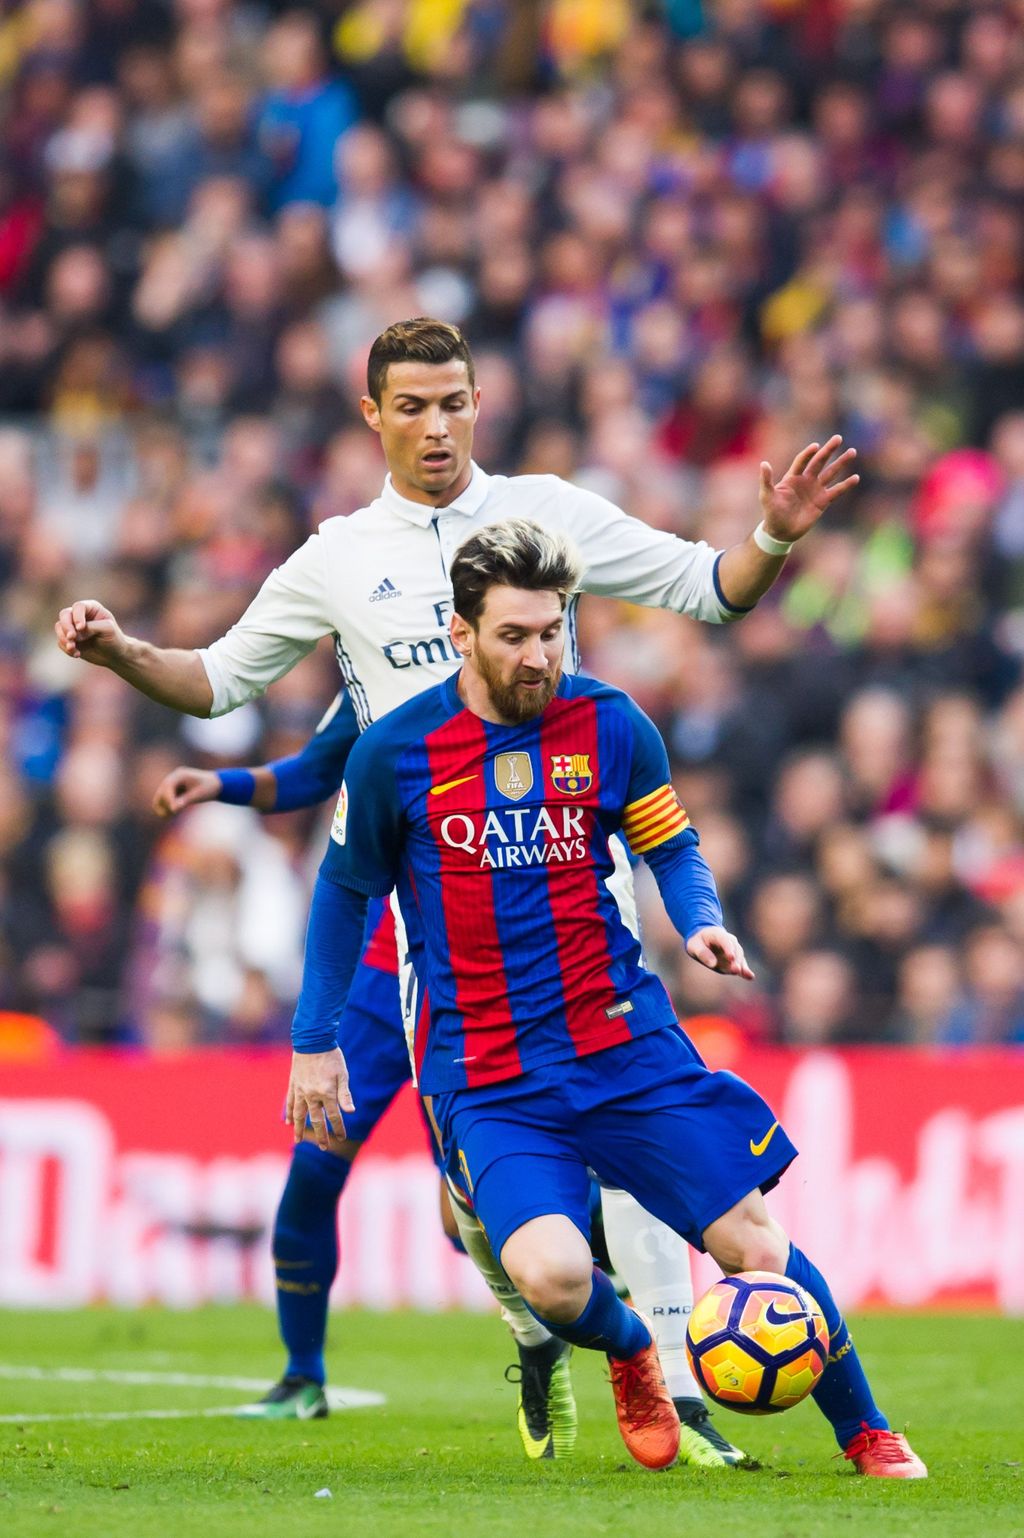 BARCELONA, SPAIN - DECEMBER 03:  Lionel Messi of FC Barcelona conducts the ball next to Cristiano Ronaldo of Real Madrid CF during the La Liga match between FC Barcelona and Real Madrid CF at Camp Nou stadium on December 3, 2016 in Barcelona, Spain.  (Photo by Alex Caparros/Getty Images)